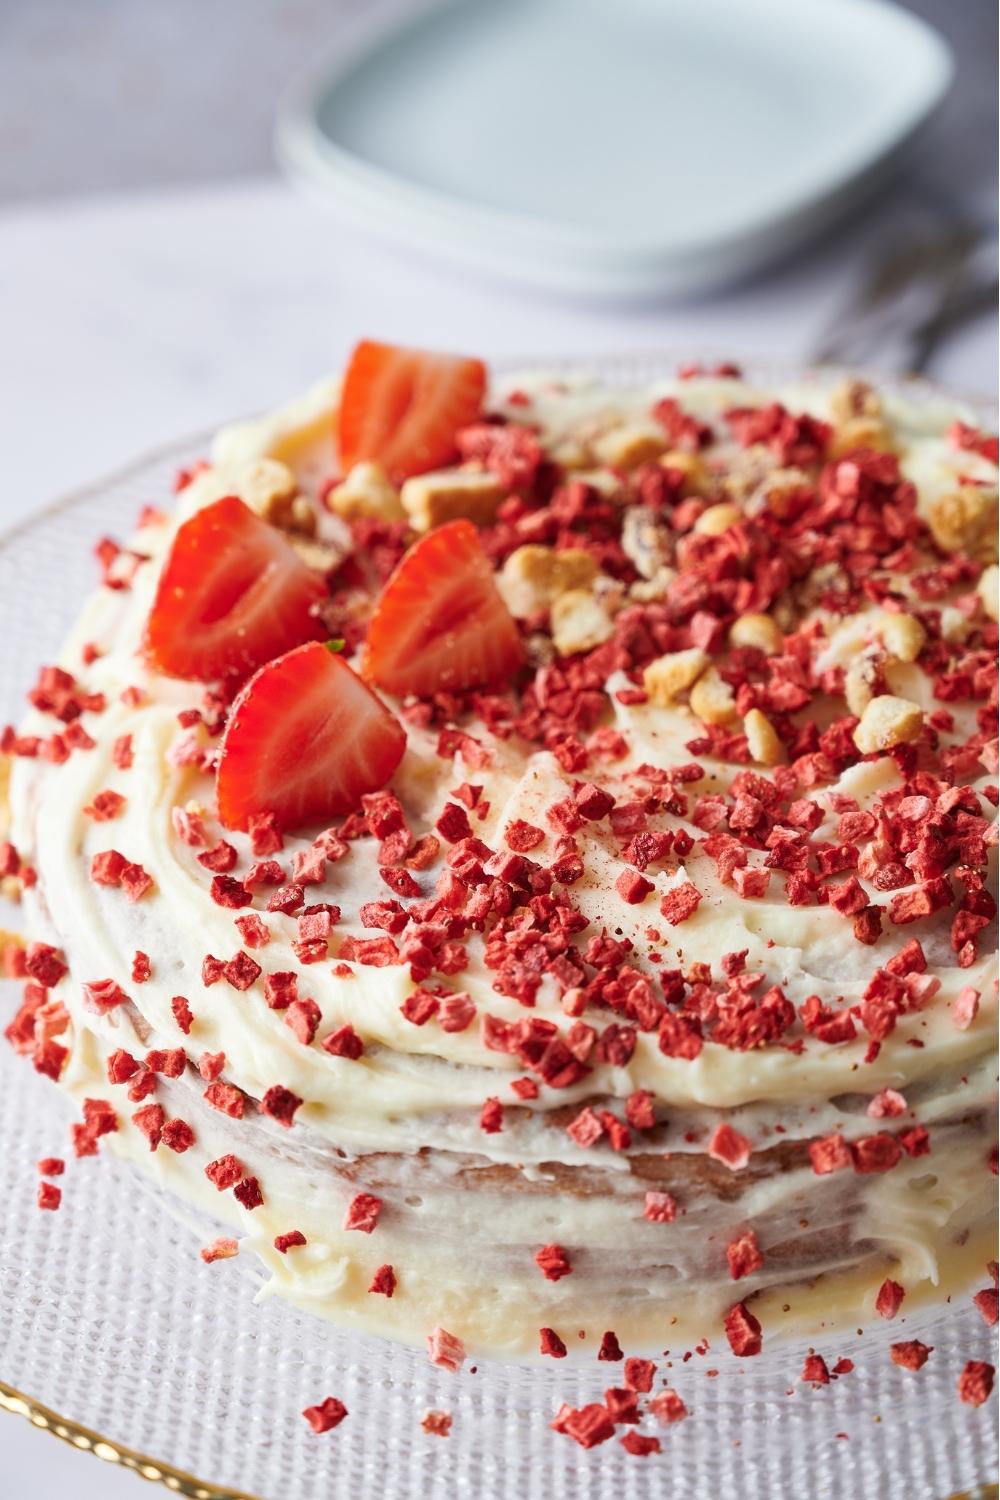 A close up of a whole strawberry cake on a serving plate. It's topped with dried strawberries, crumbled cookies, frosting and fresh sliced strawberries.